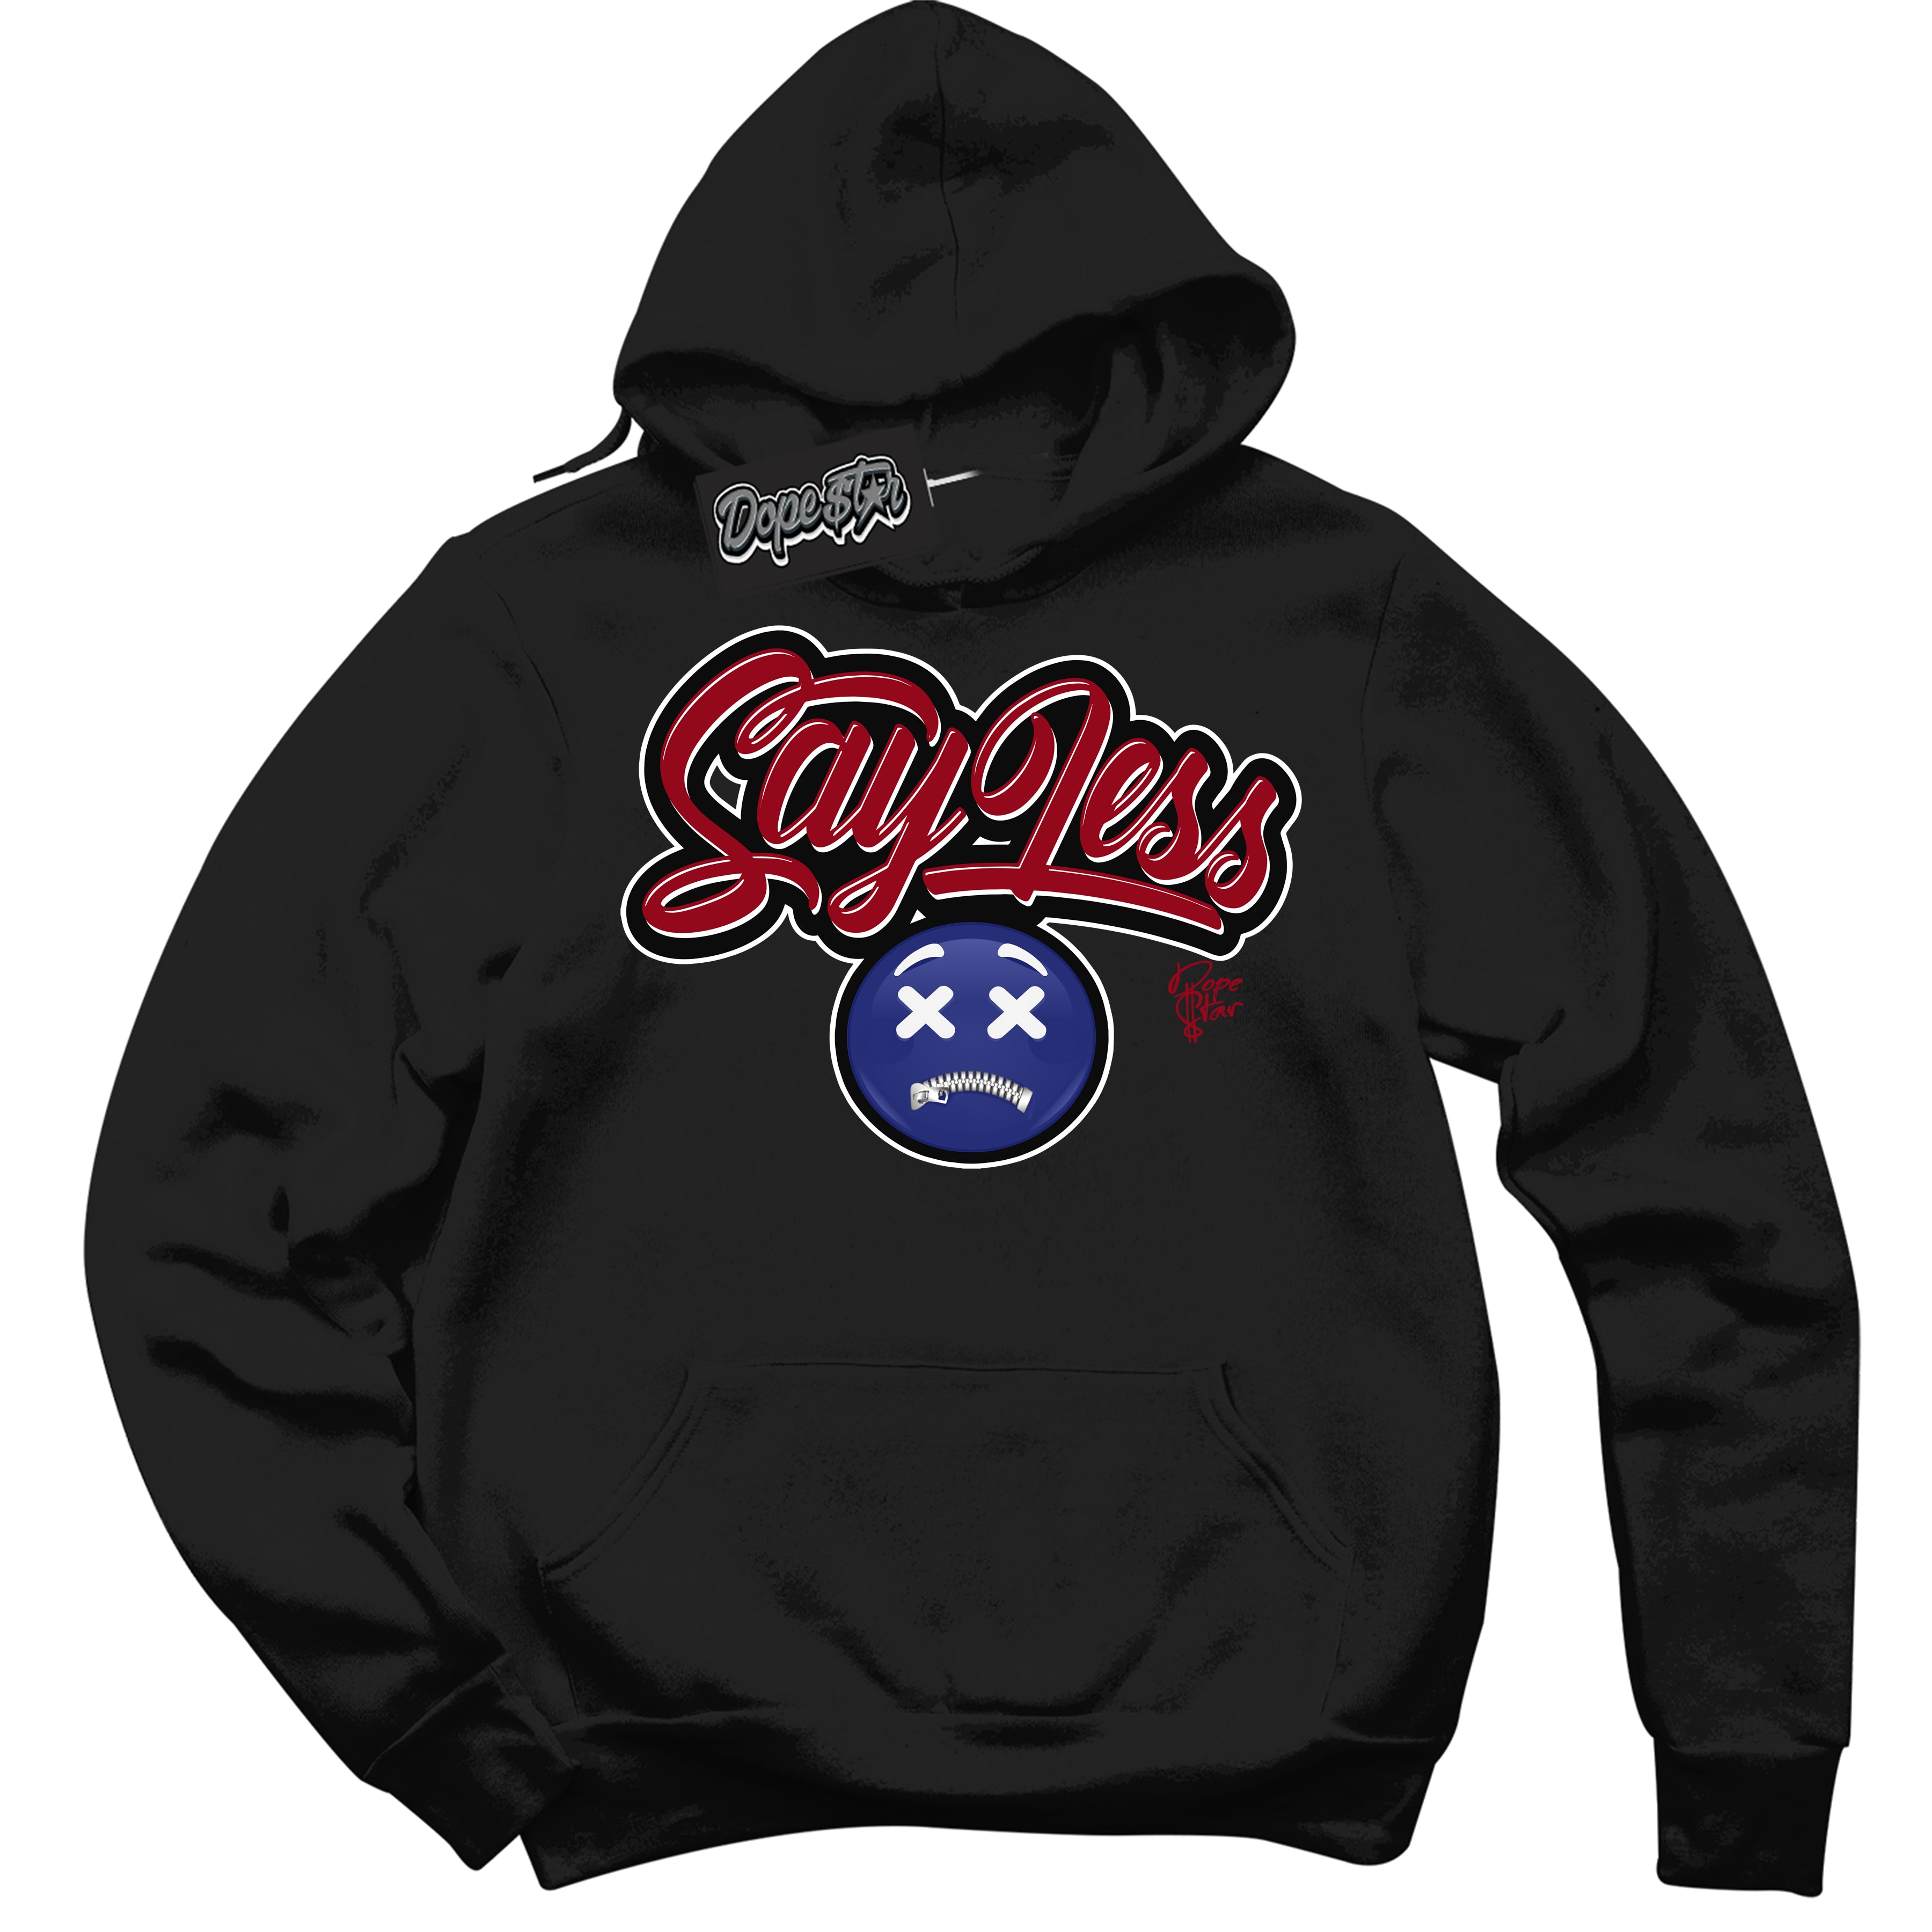 Cool Black Hoodie with “ Say Less ”  design that Perfectly Matches Playoffs 8s Sneakers.